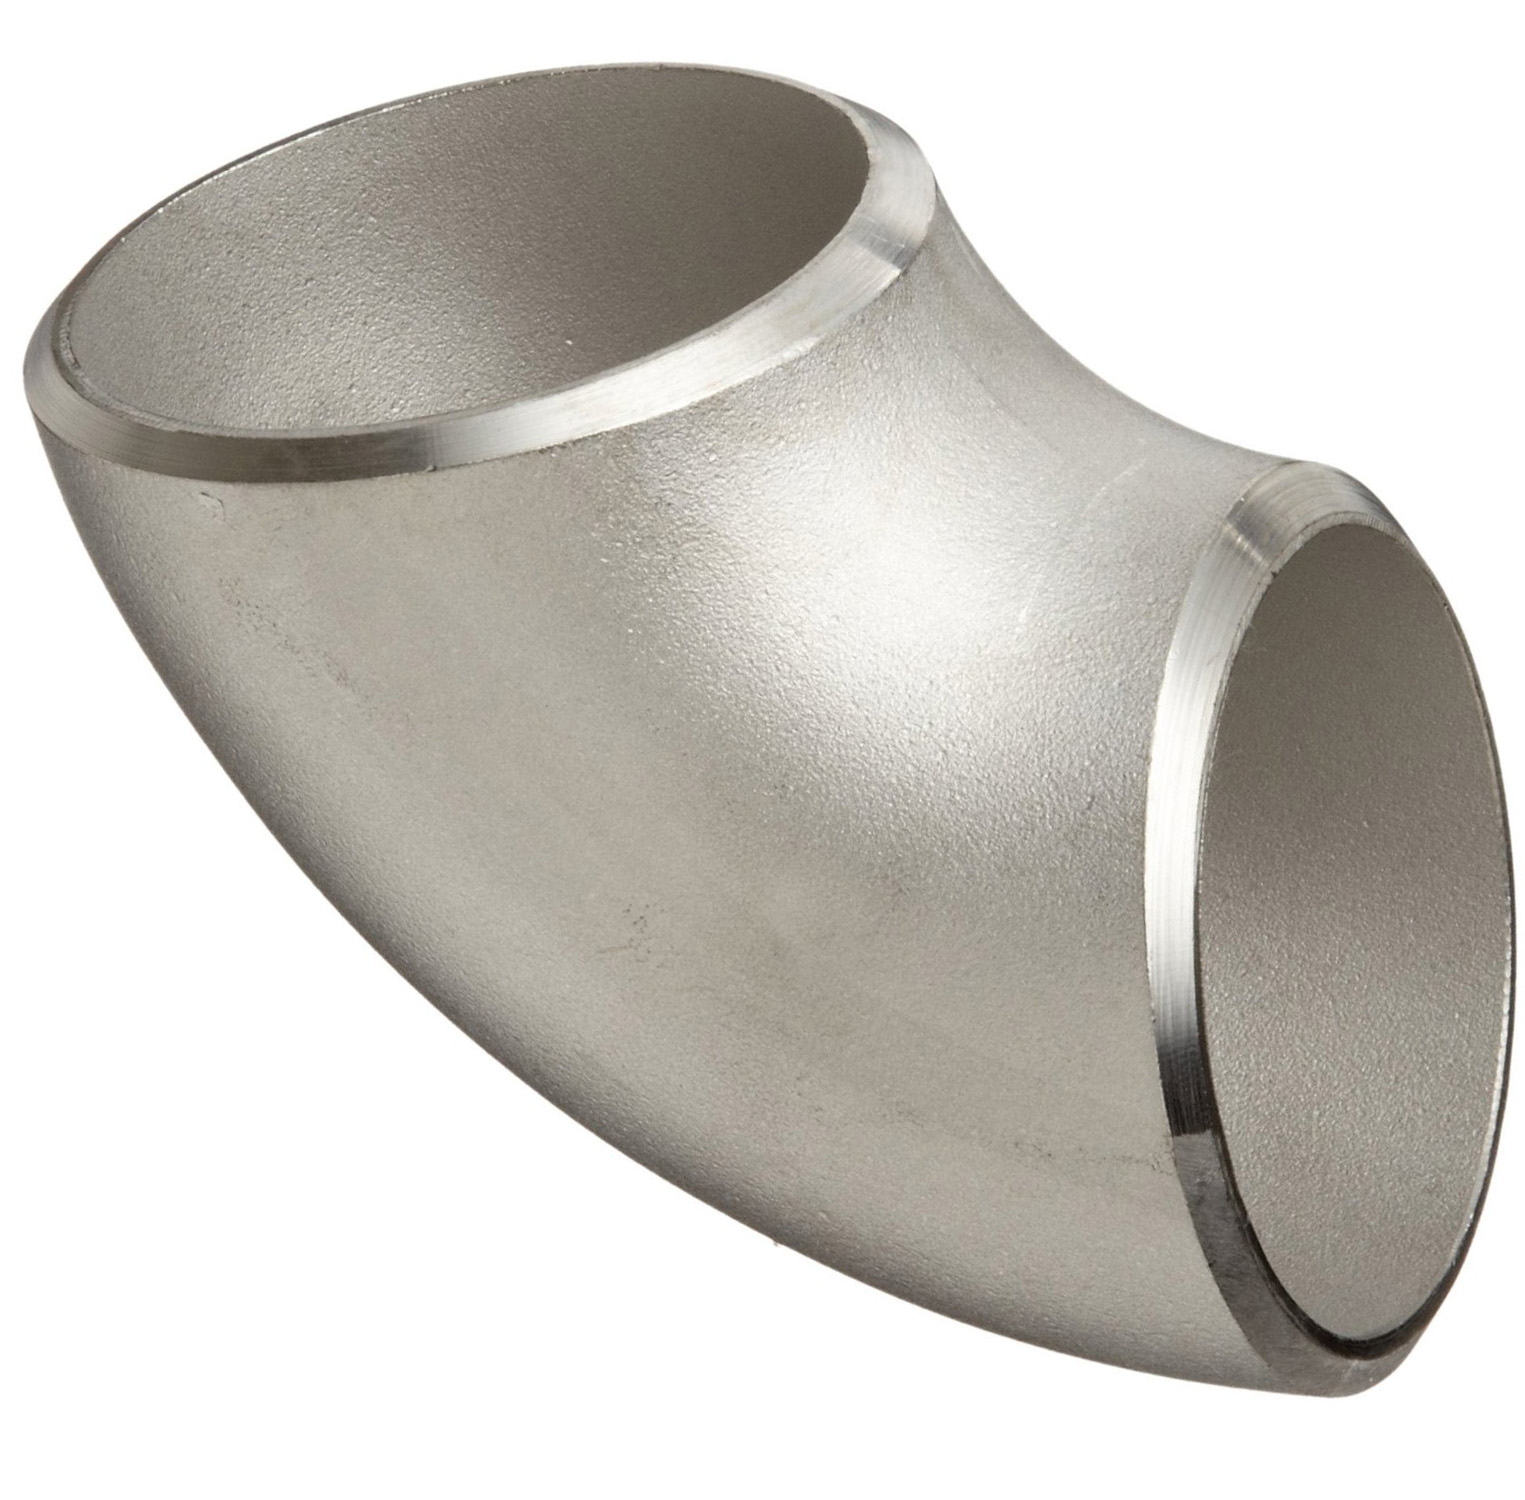 OD 45mm 1-3/4''Sanitary Weld Elbow Pipe Fitting 45 Degree 304 Stainless Steel*2 